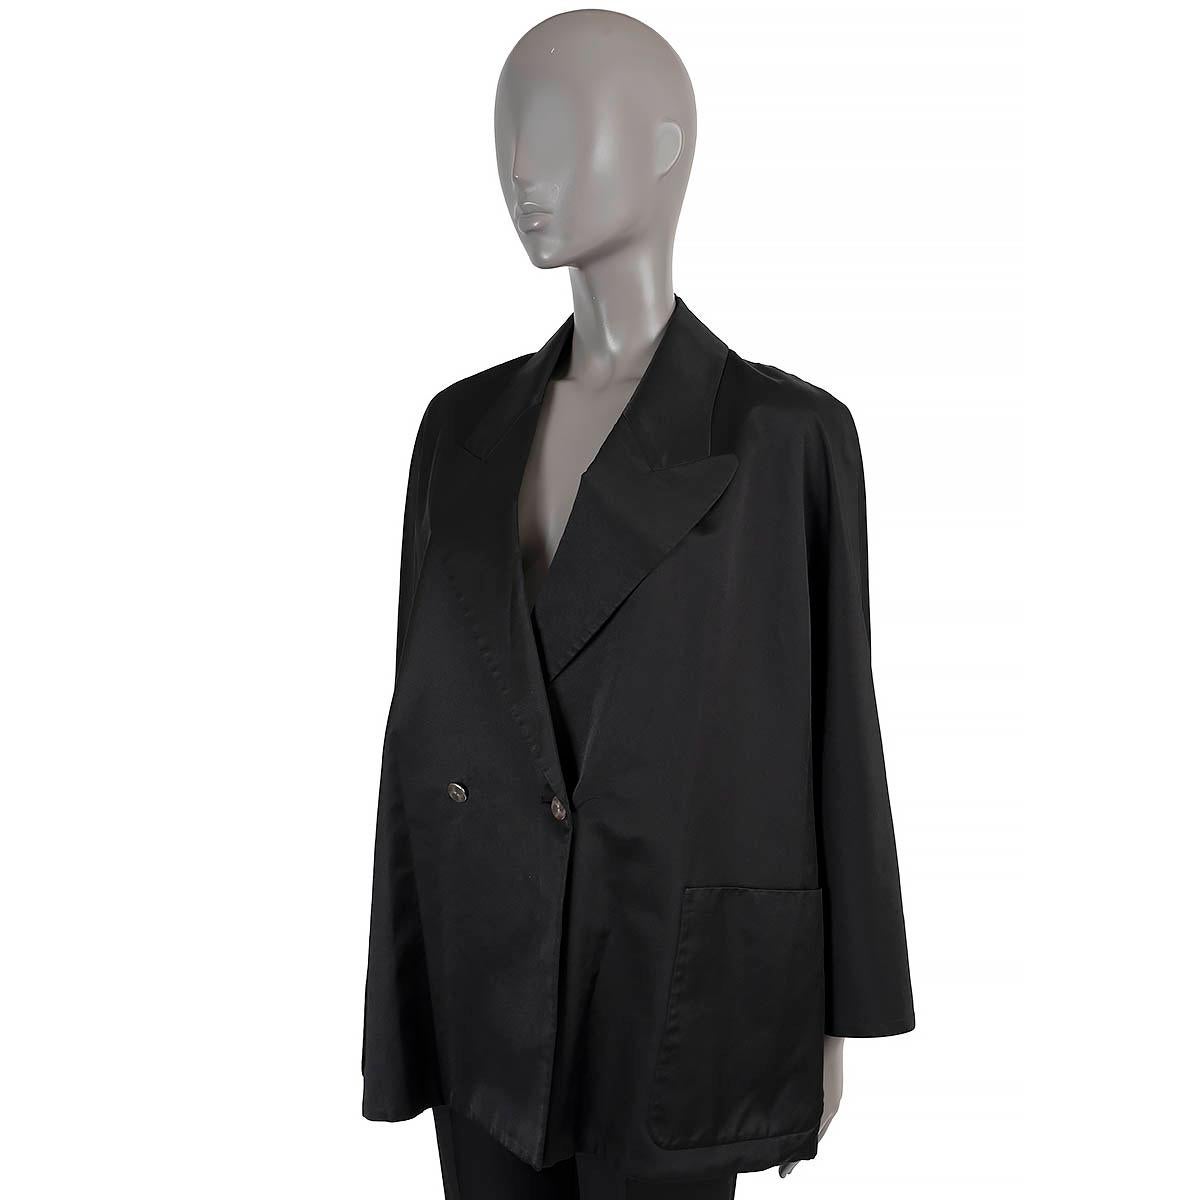 100% authentic Hermès tuxedo blazer in black cotton (67%) and silk (33%). Features raglan sleeves, peak lapels, slightly A-line shape and two patch pockets at the waist. Double-breasted silver-tone metal button closure. Has been worn and is in